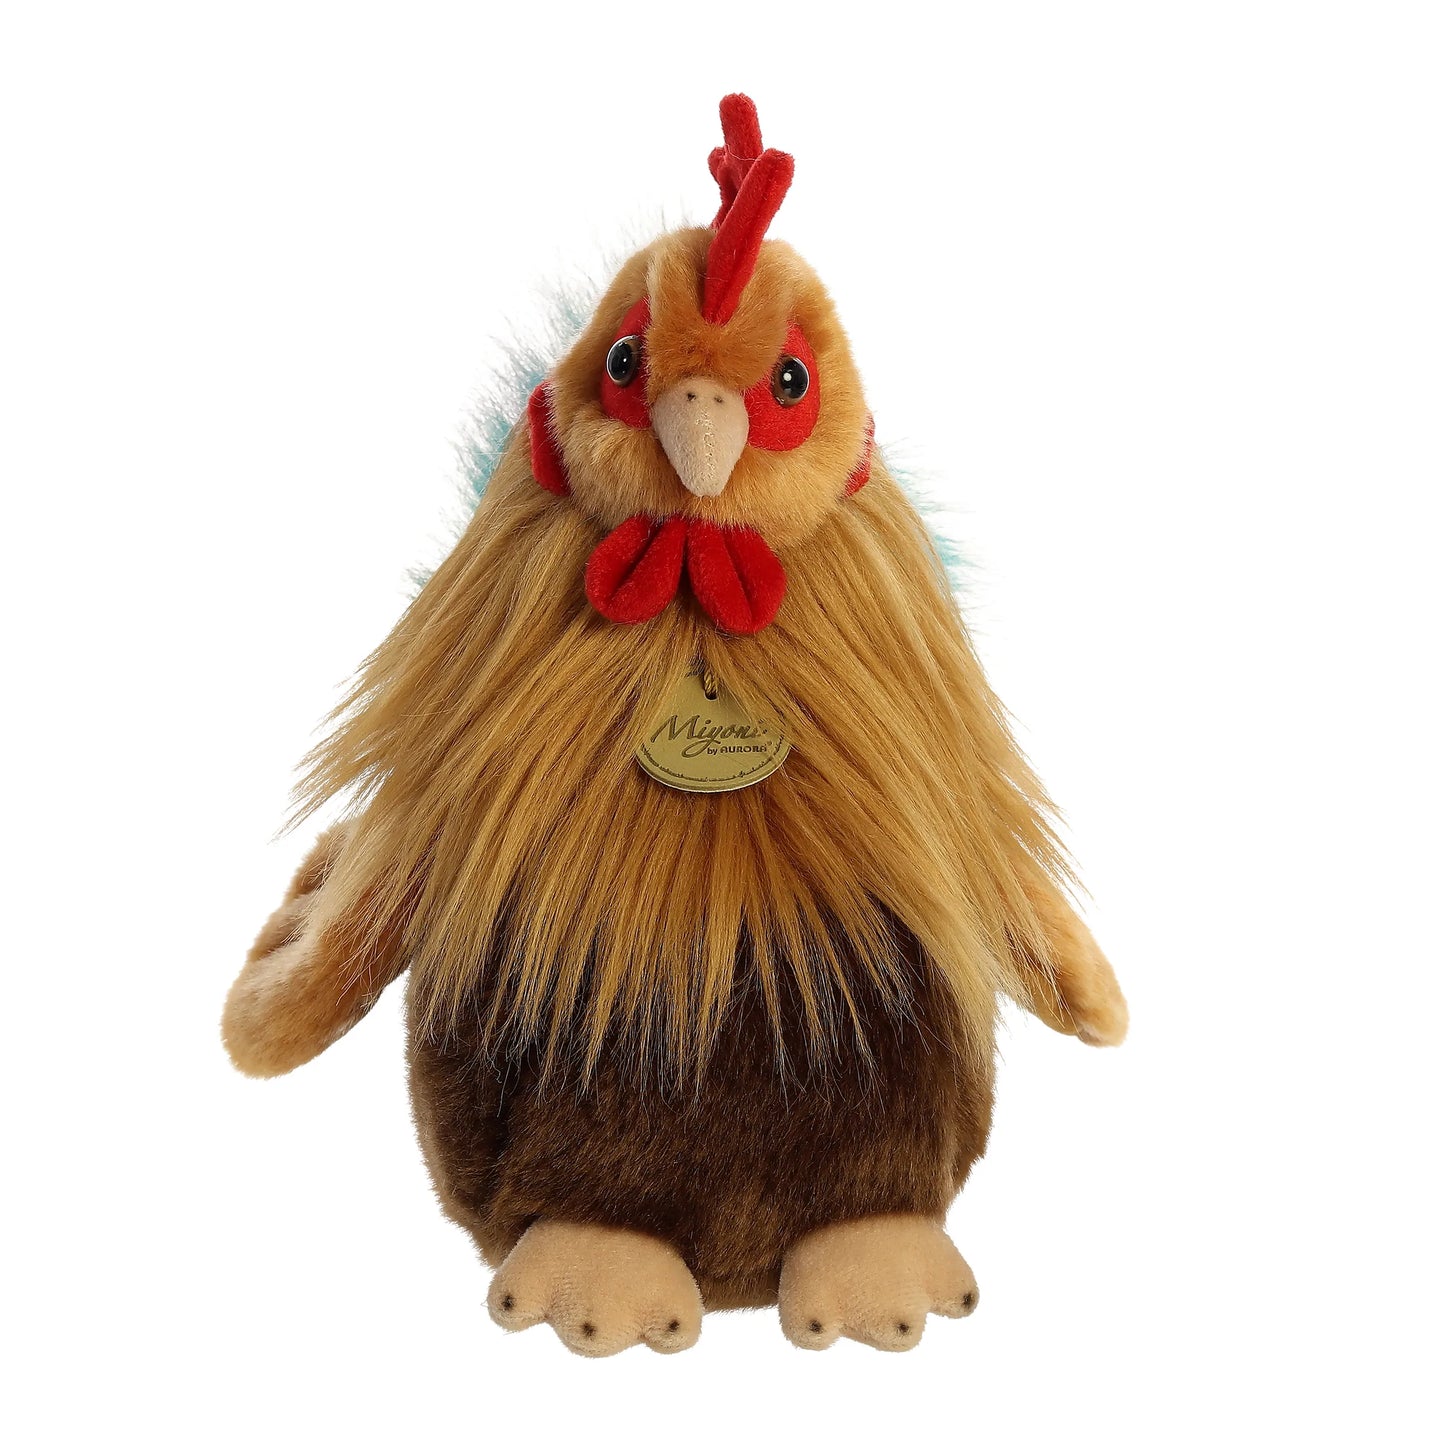 Rooster Plush